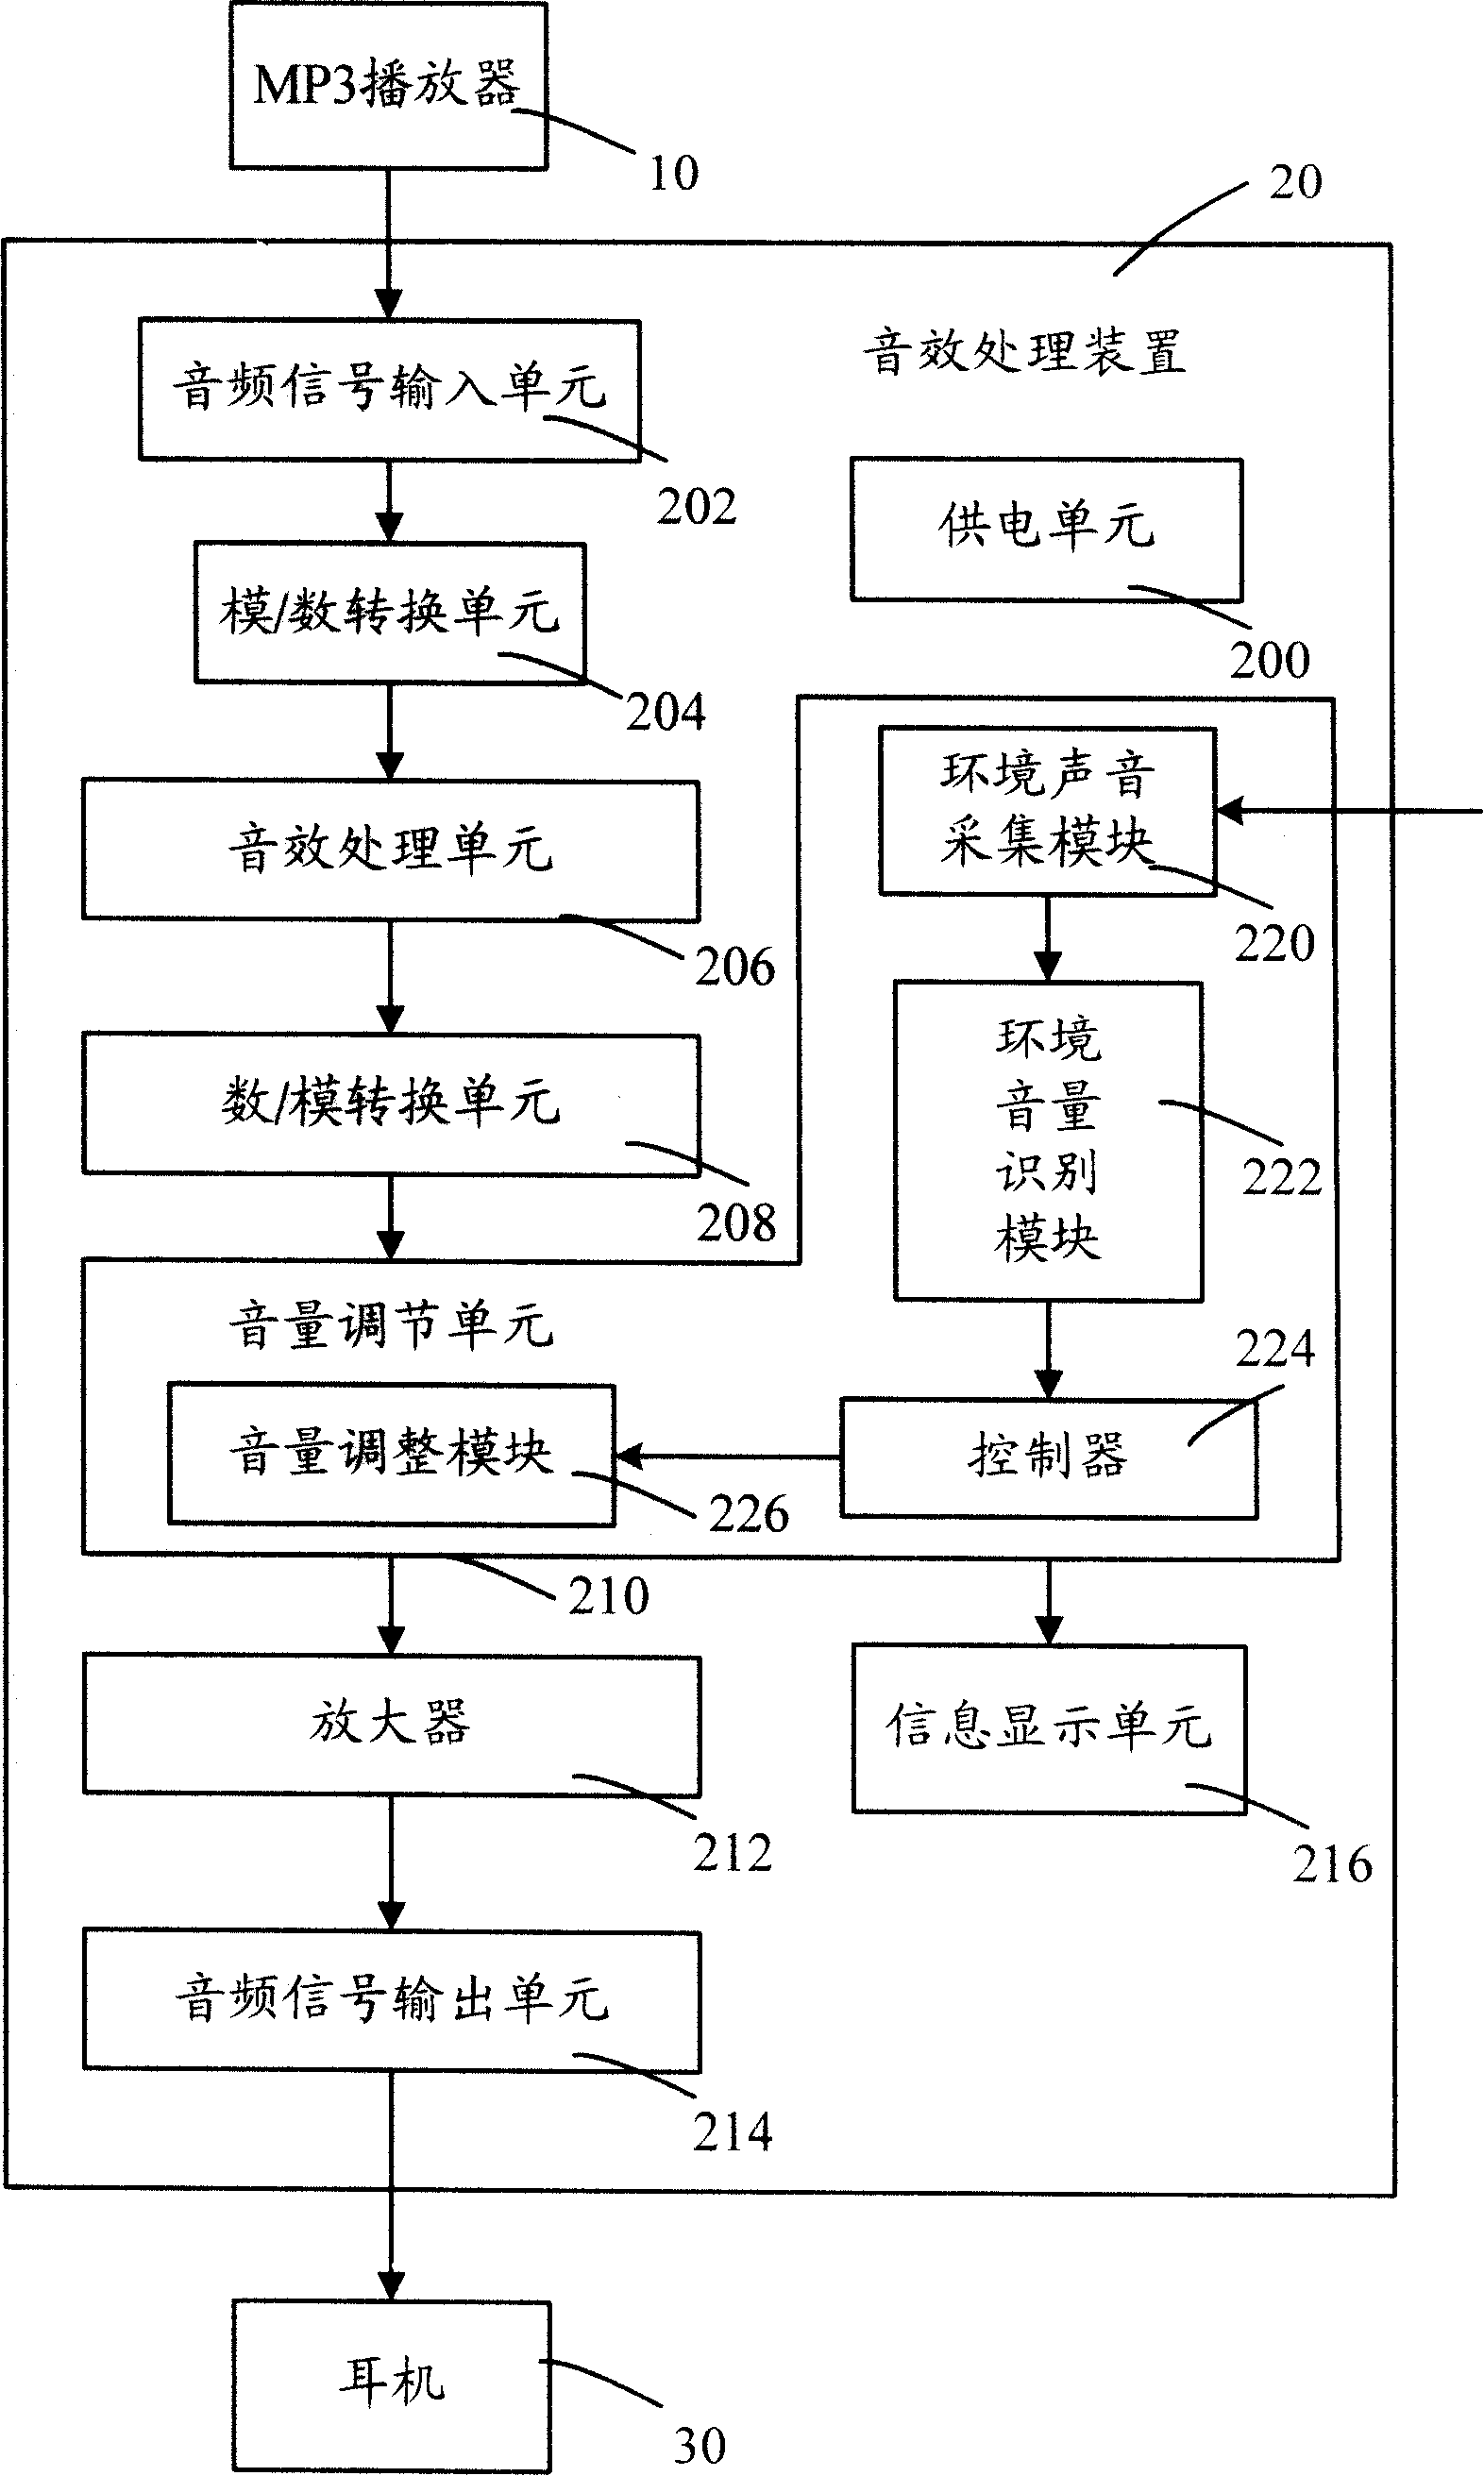 Sound-effect processing equipment and method